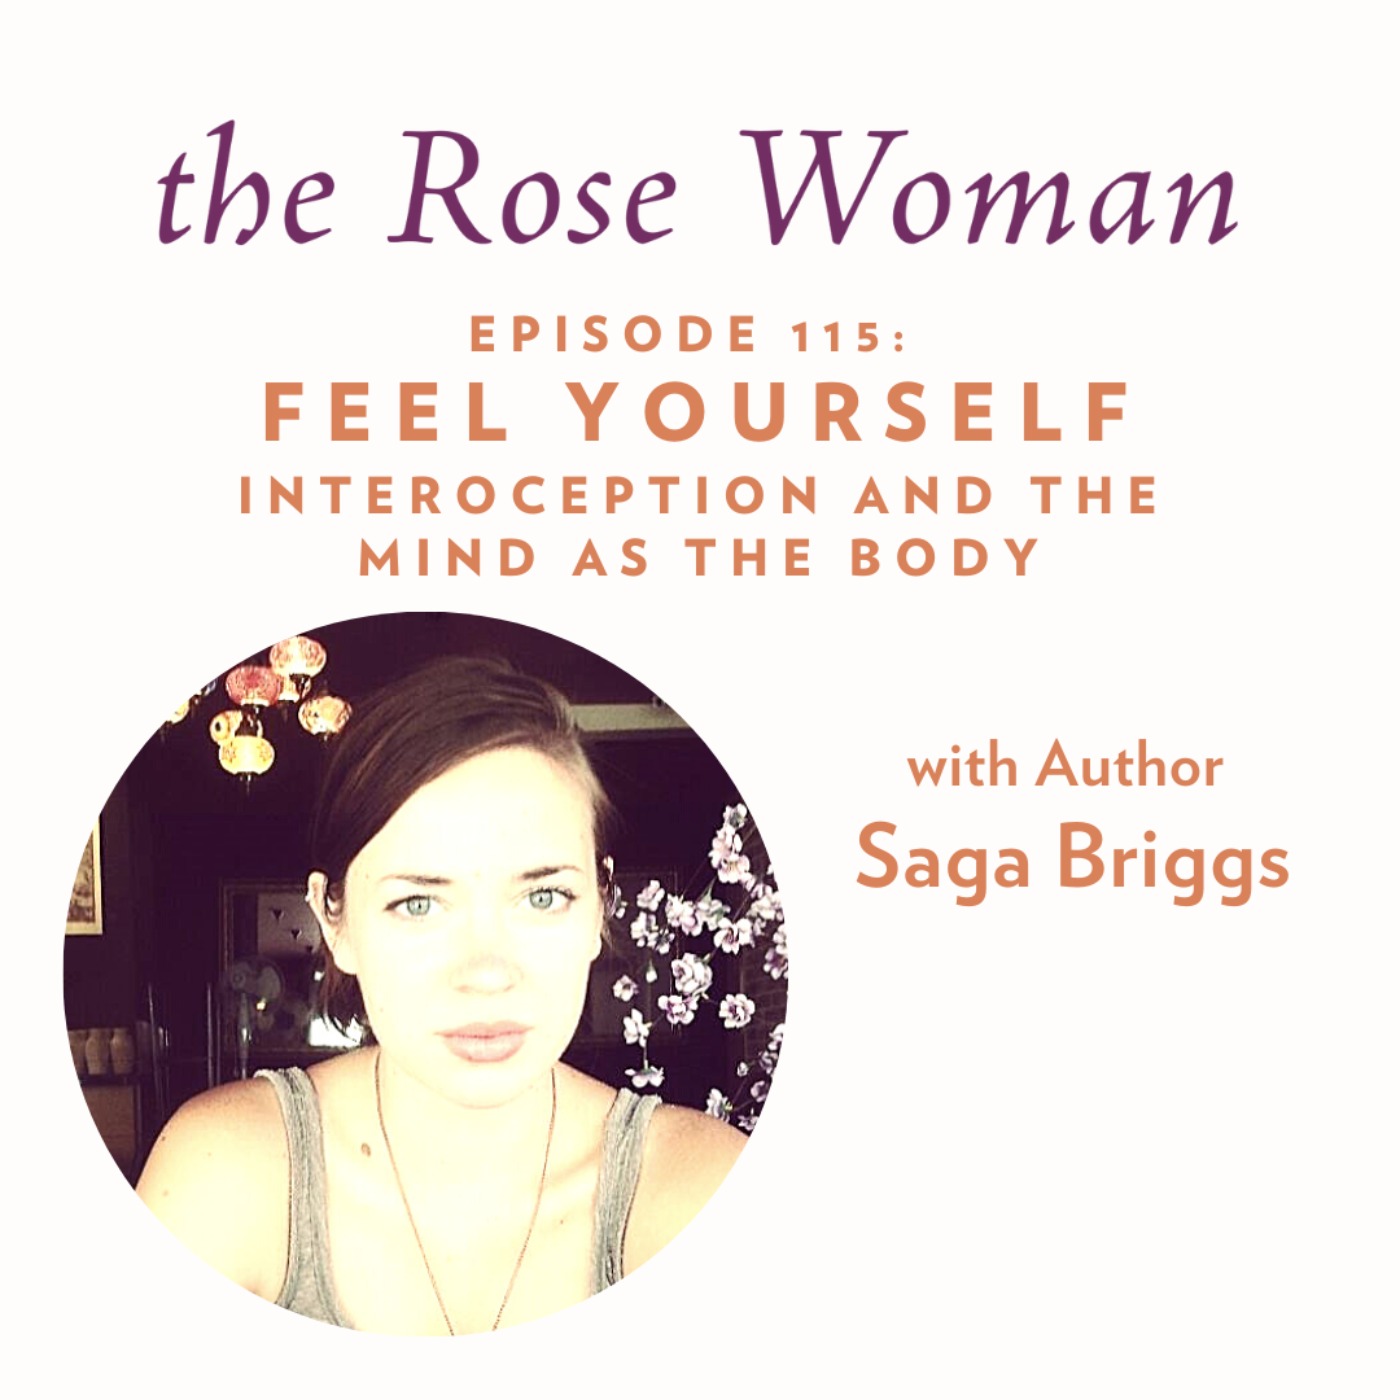 cover art for Feel Yourself: Interoception. Connection and the Mind as the Body, with Saga Briggs